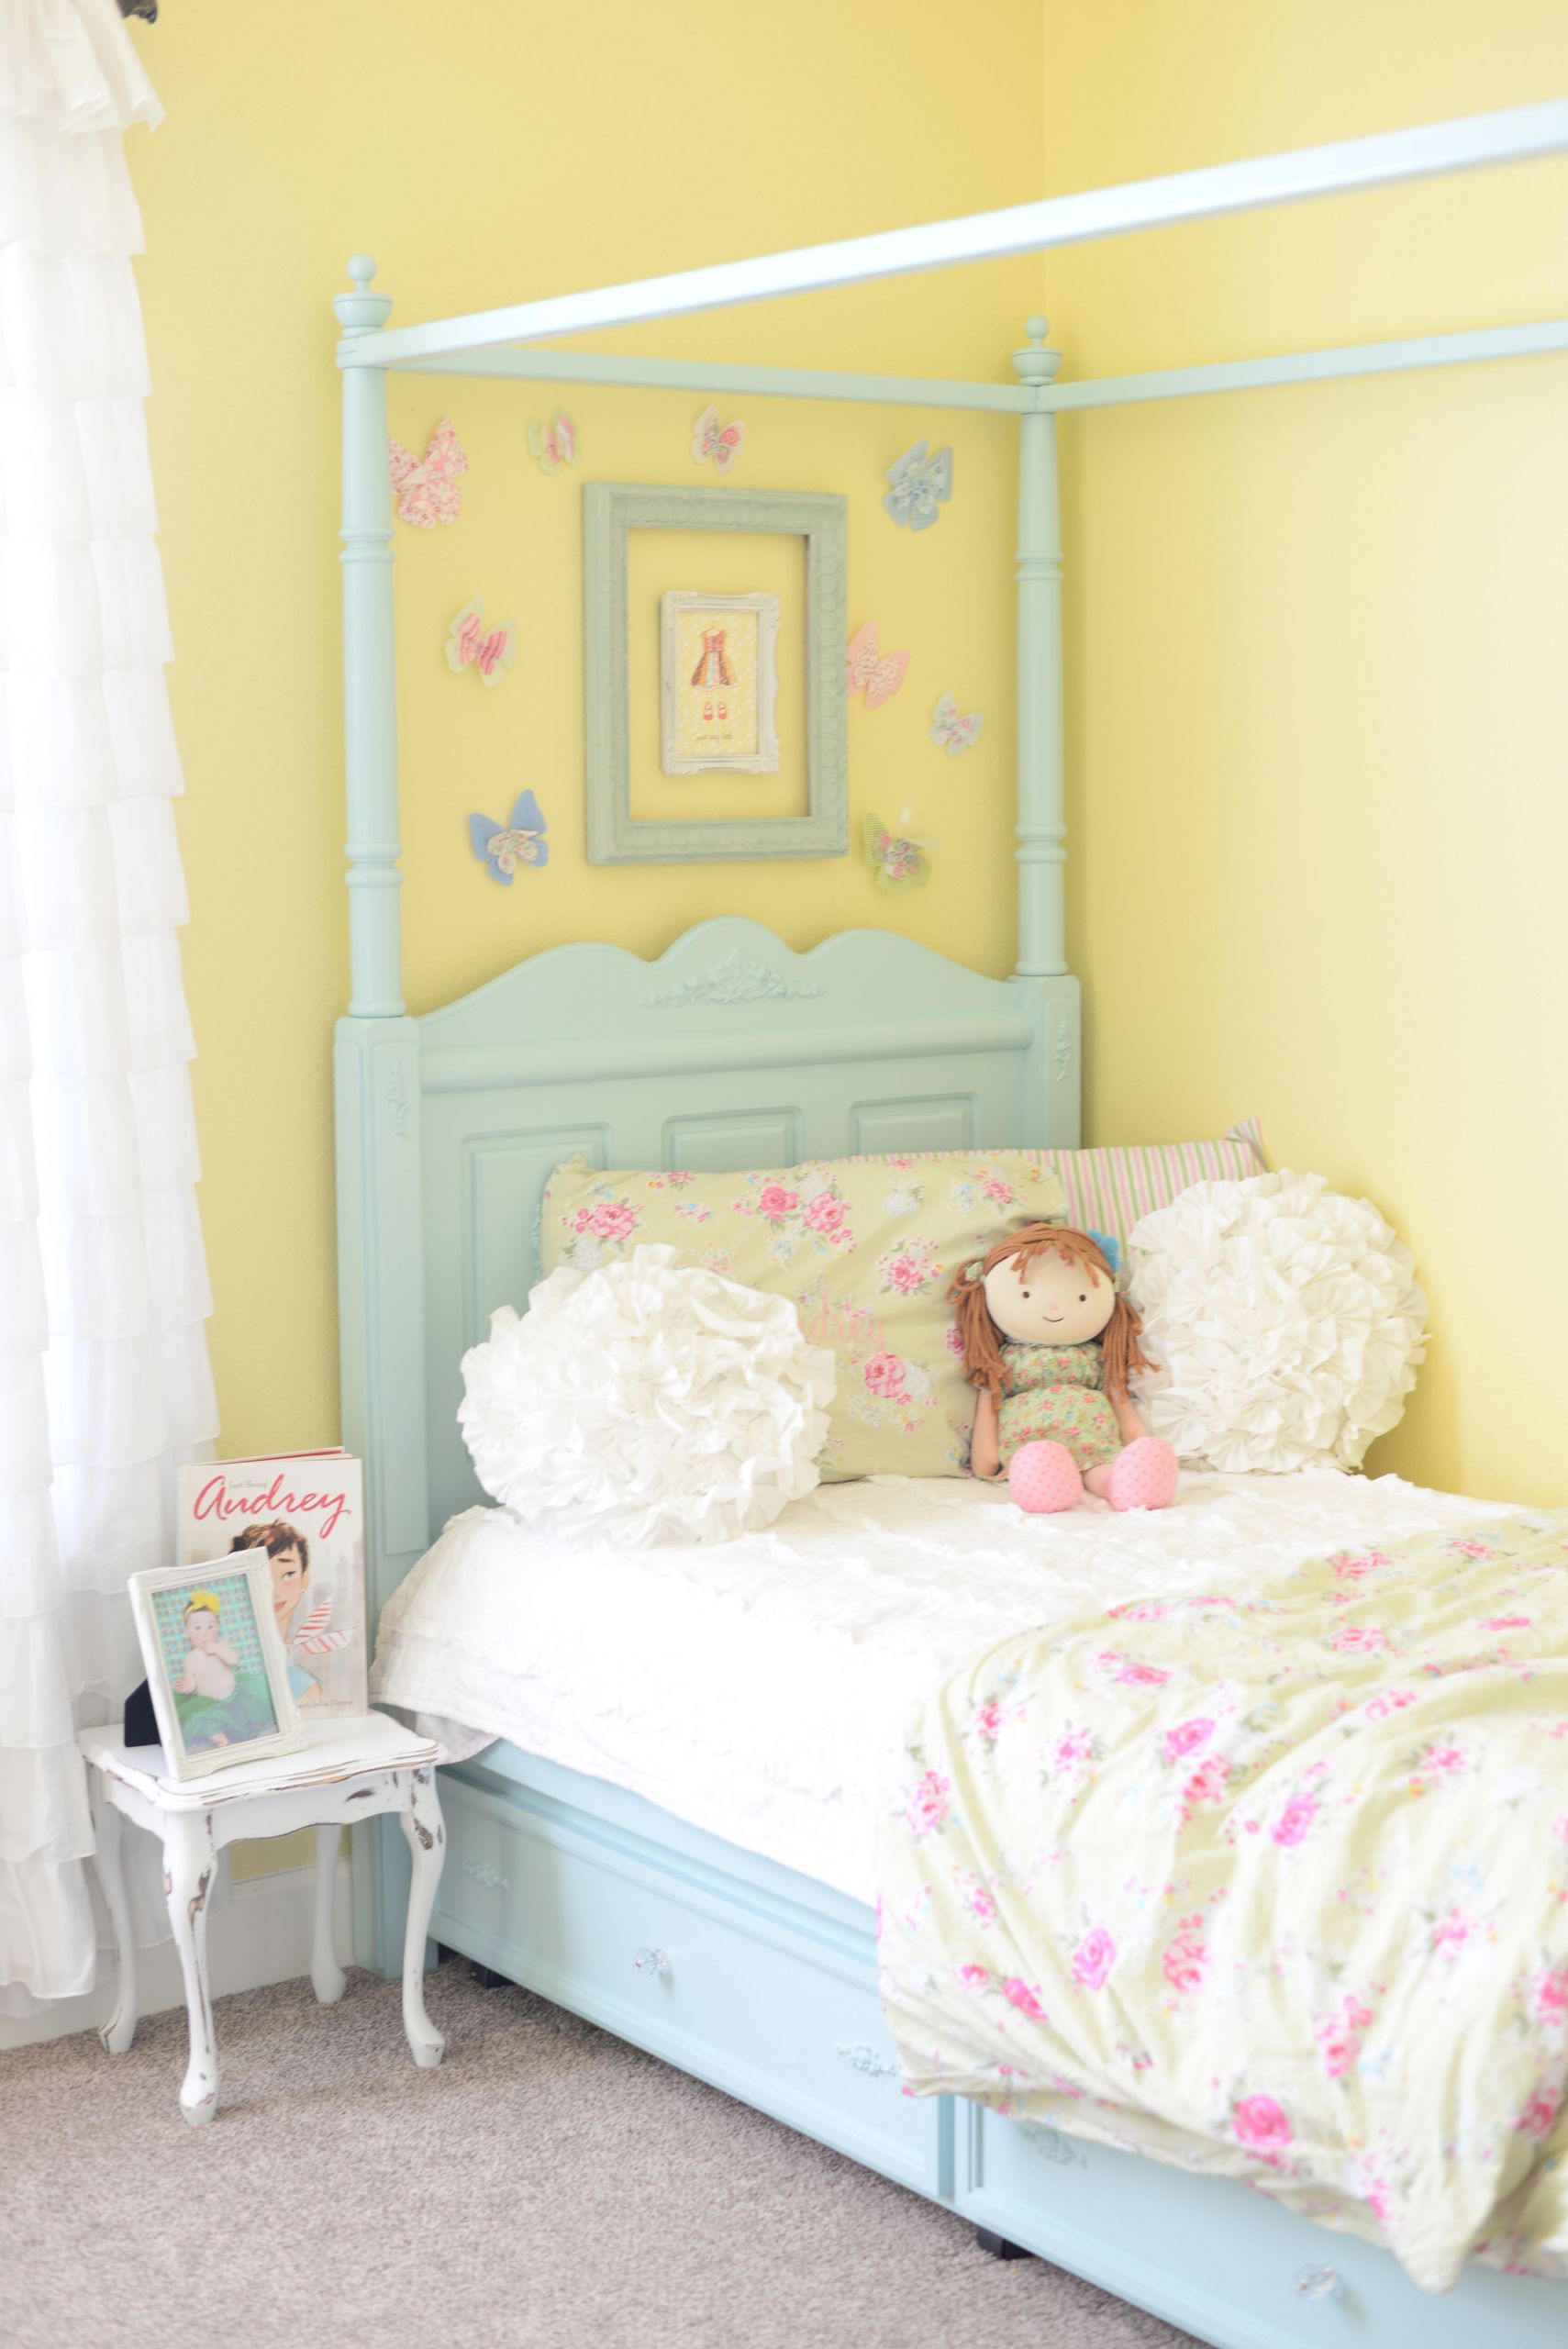 Shabby Chic Girls Bedroom
 Shabby Chic Girls Bedroom Love this wall color